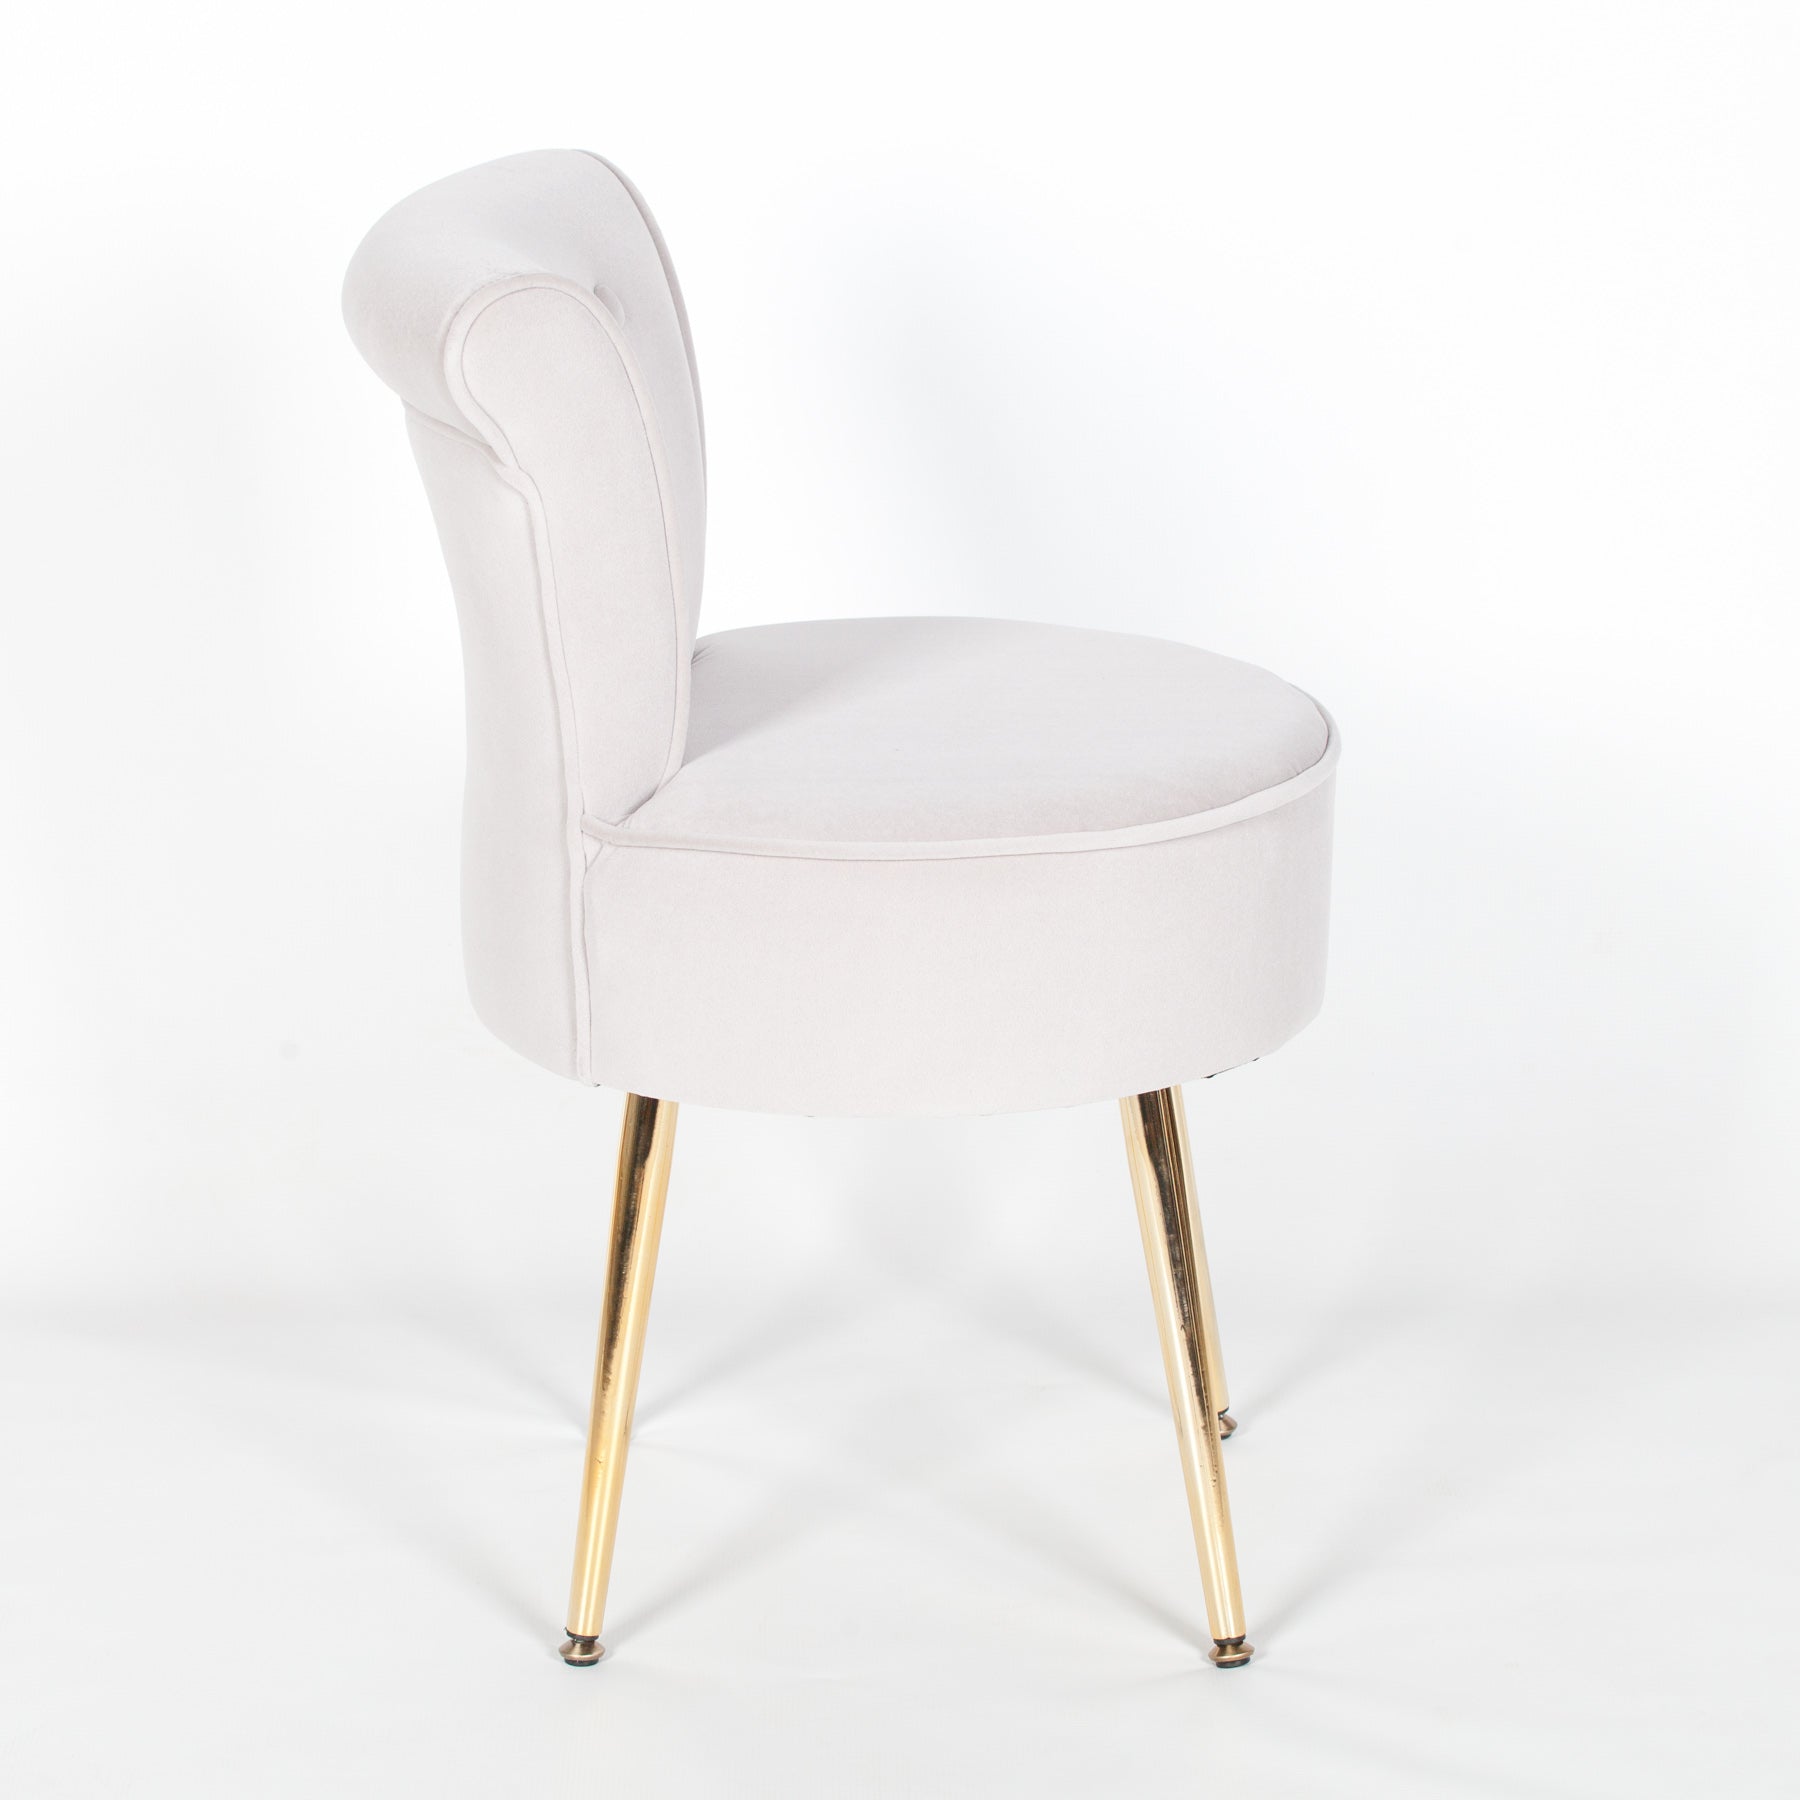 Grey Stool / Bedroom Chair with Gold Legs